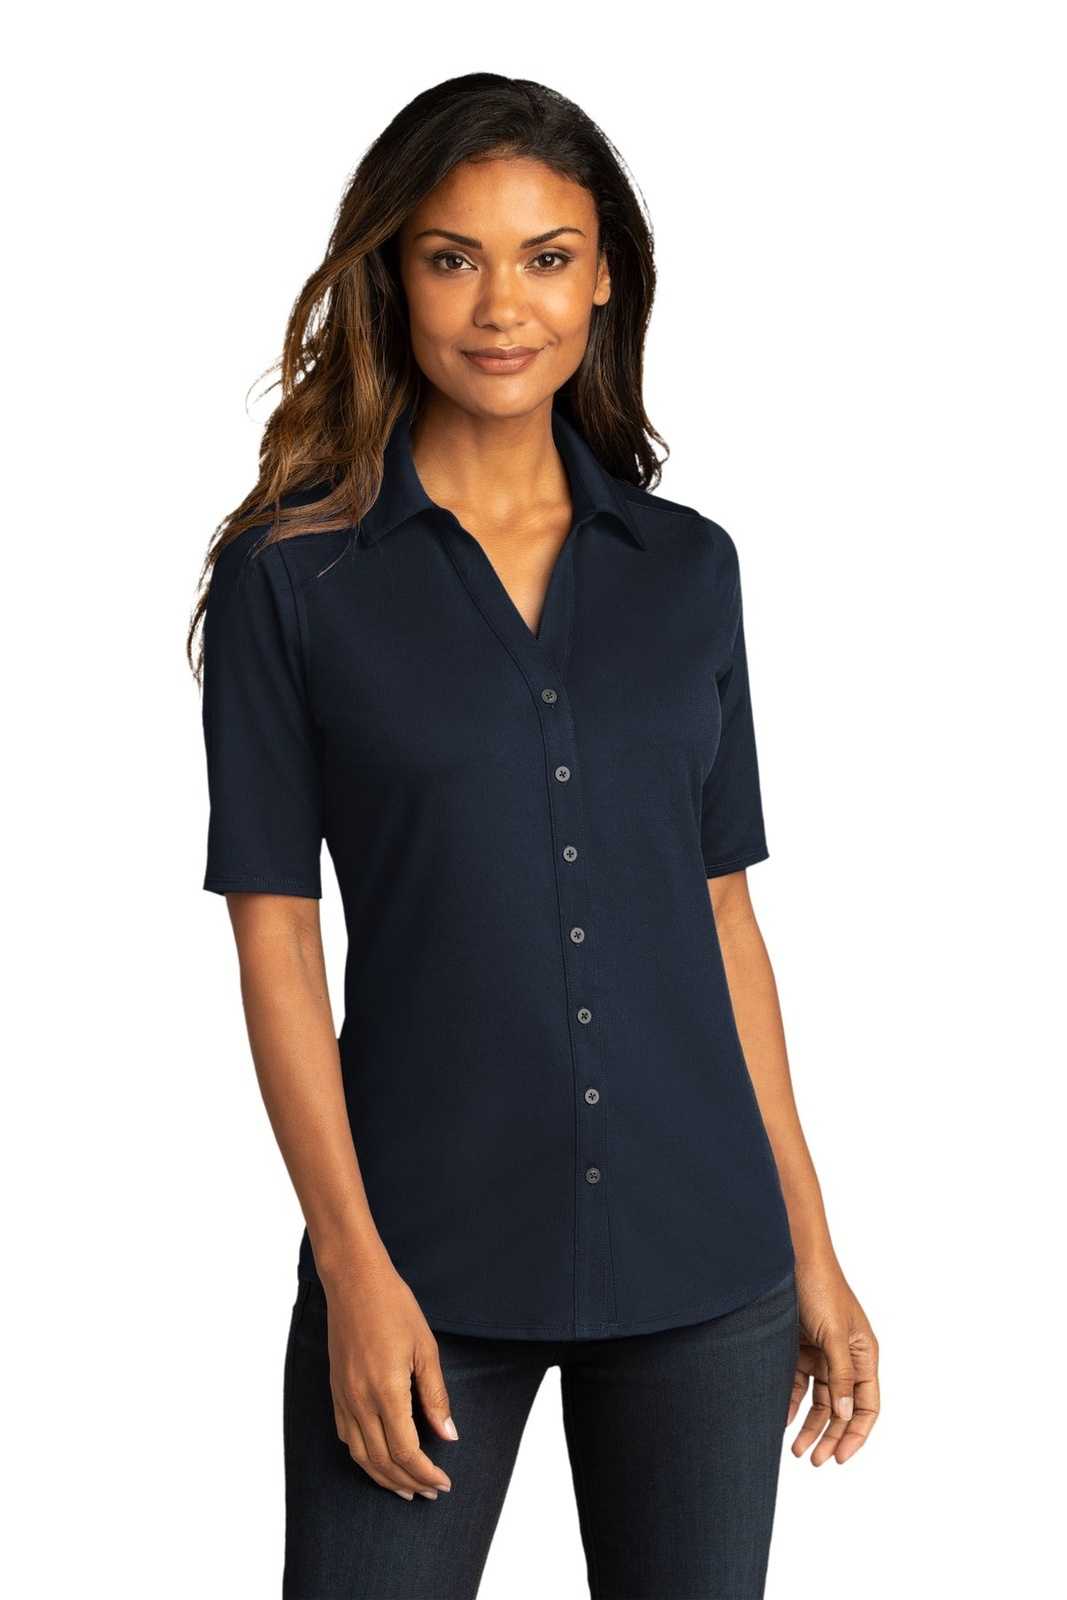 Port Authority LK682 Ladies City Stretch Top - River Blue Navy - HIT a Double - 1